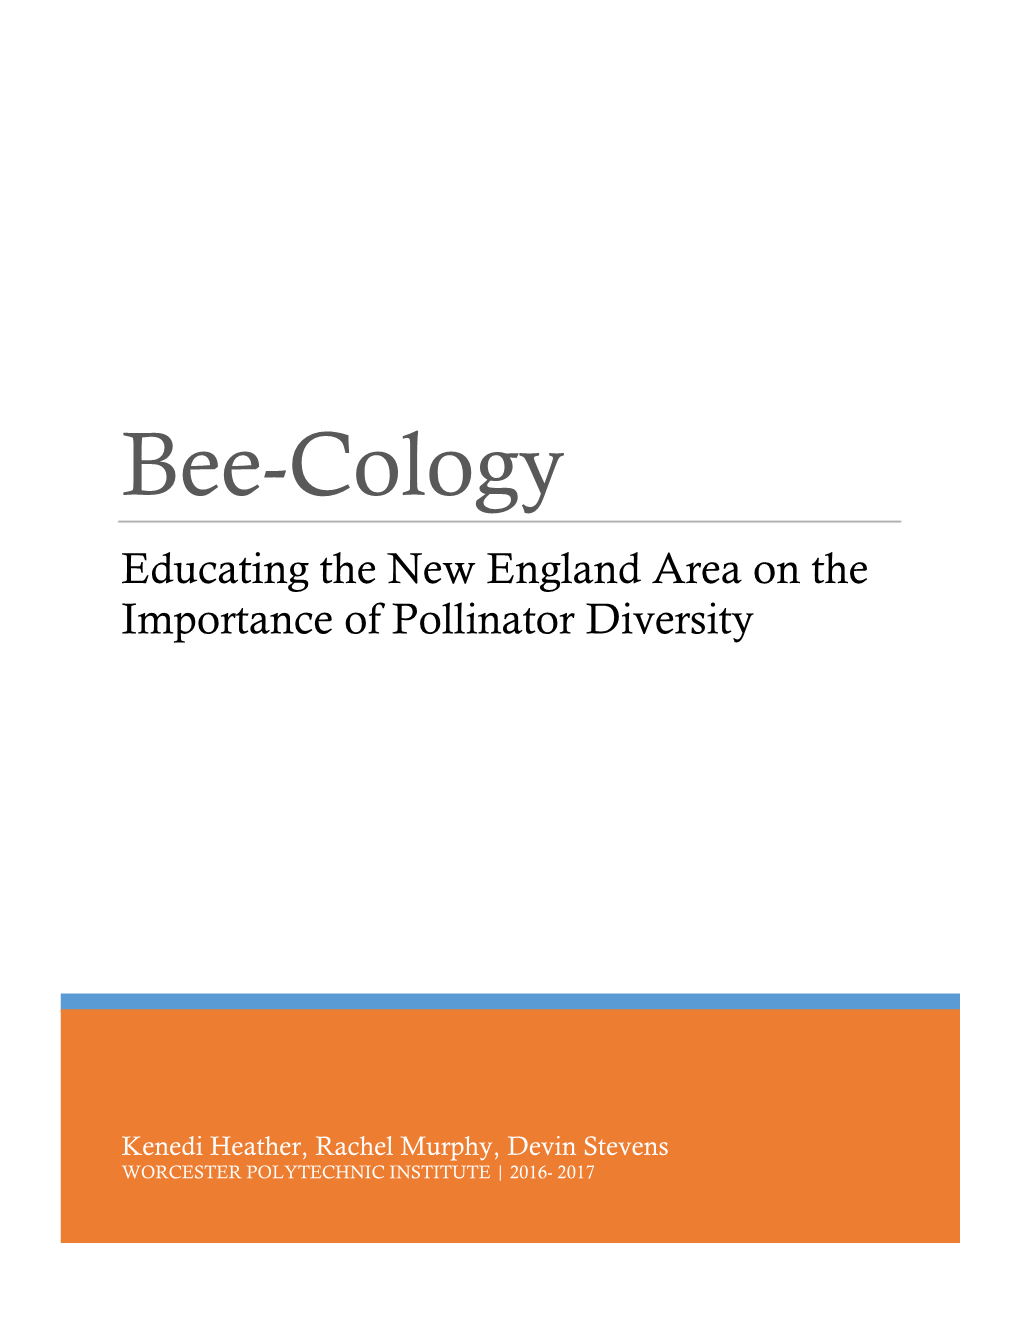 Bee-Cology Educating the New England Area on the Importance of Pollinator Diversity